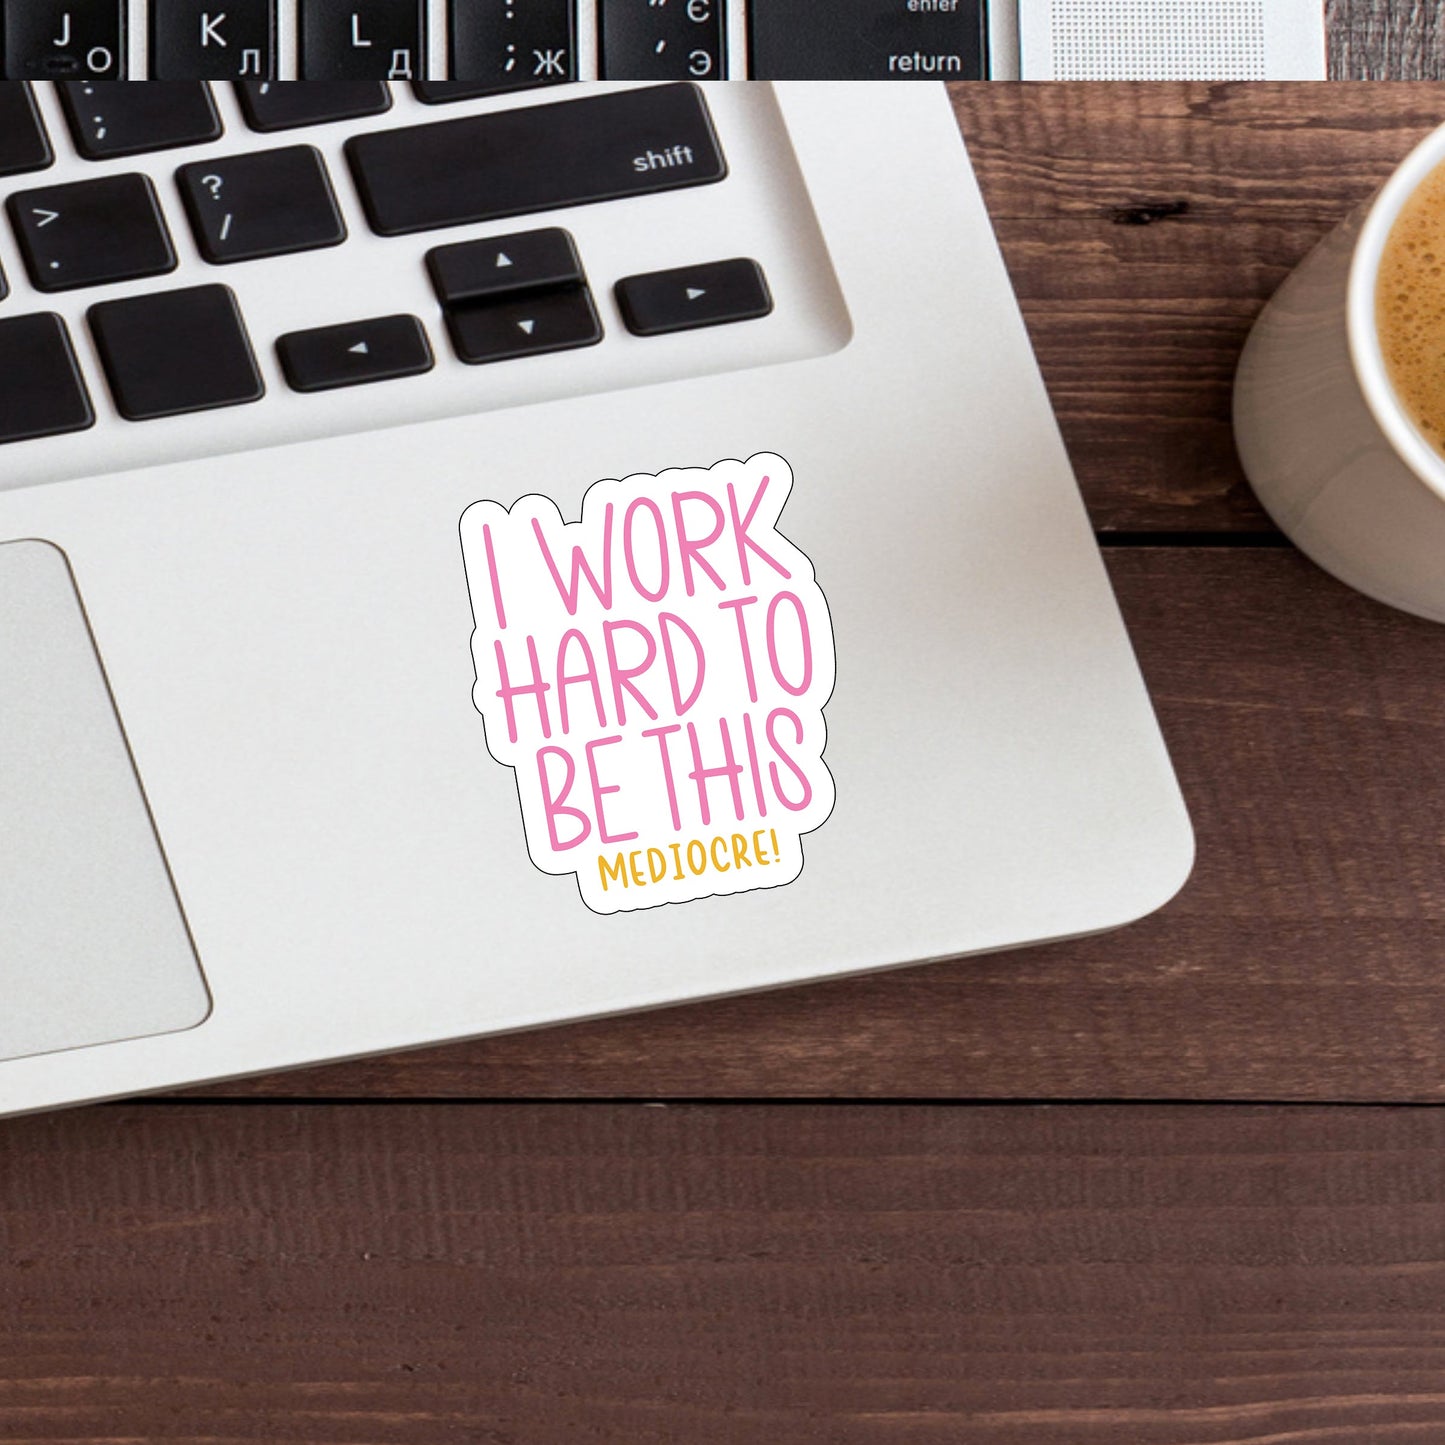 I work hard to be this mediocre  Sticker,  Vinyl sticker, laptop sticker, Tablet sticker